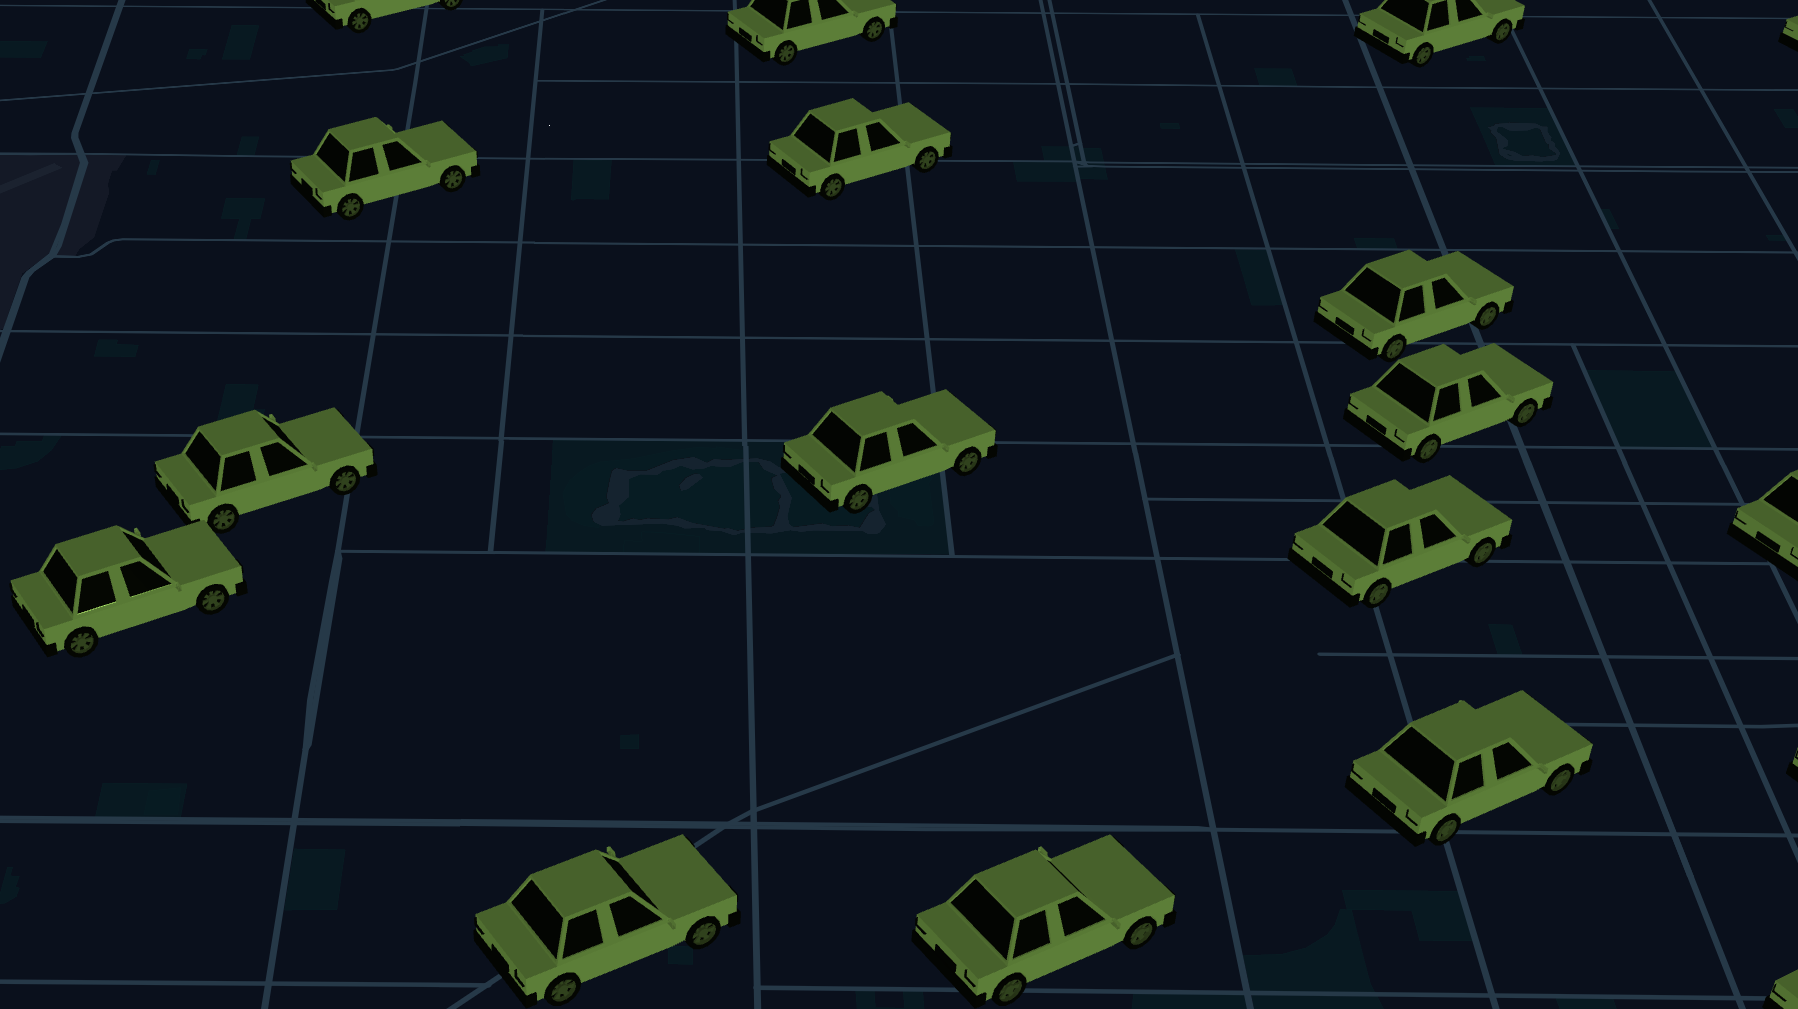 The 3D Layer showing car models.